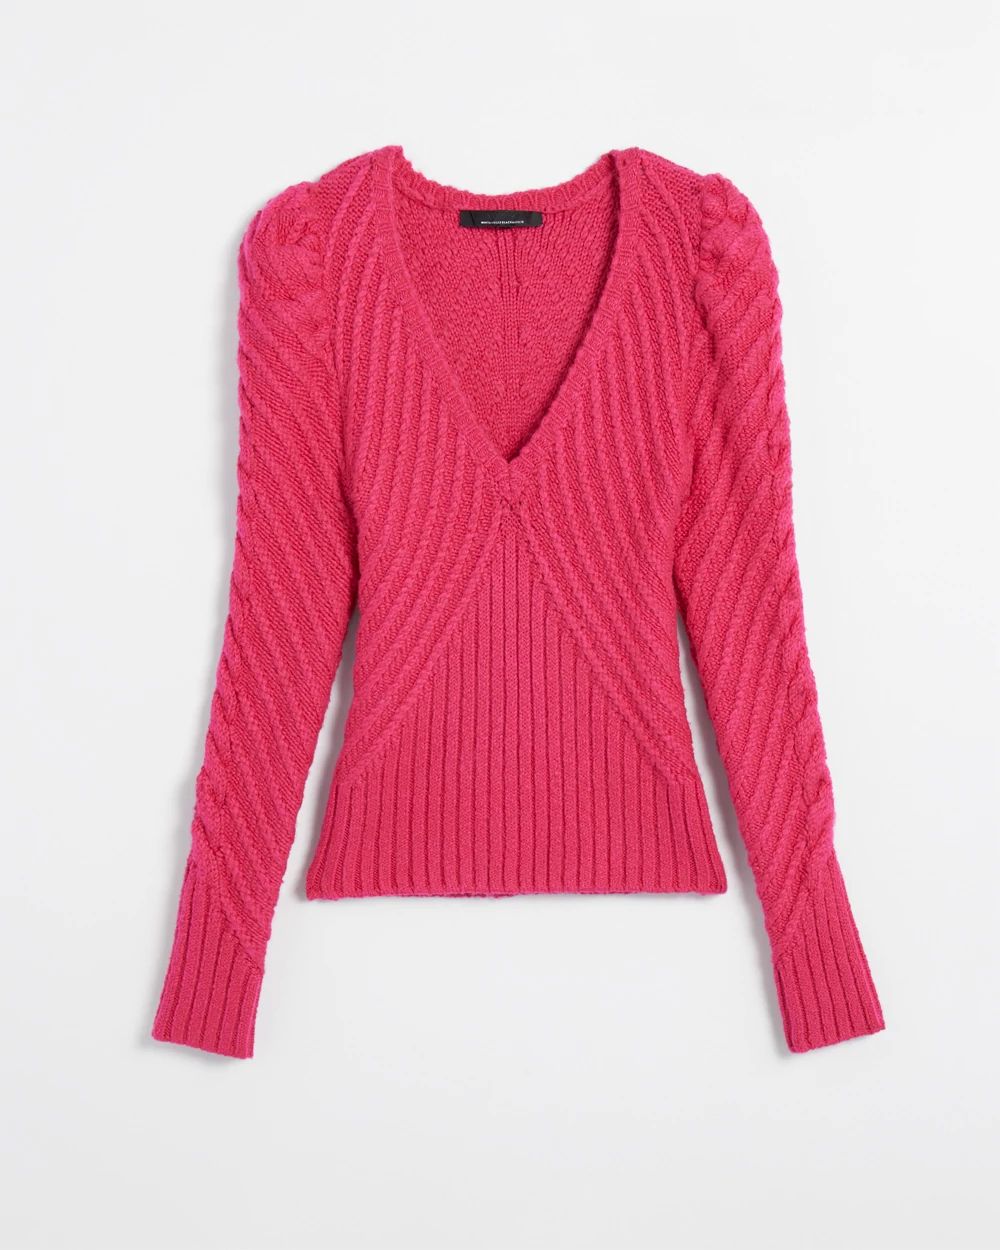 Petite V-Neck Puff Sleeve Cable Pullover Sweater click to view larger image.